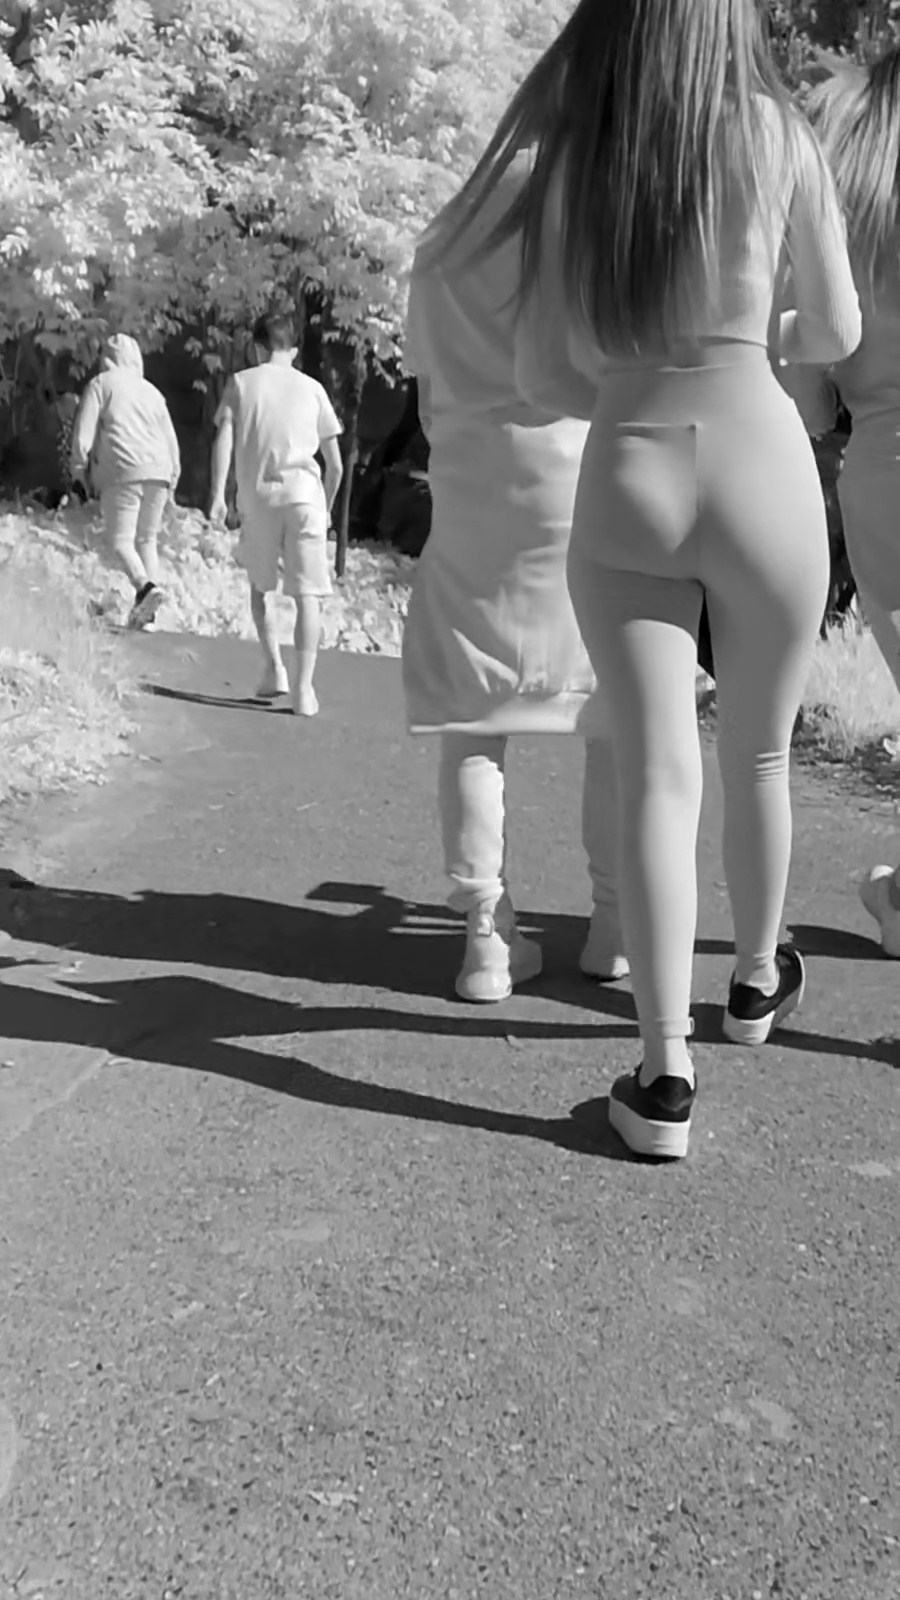 Cute Slim TEEN With BIG ASS In White Spandex With Visible Panty Lines - Candid Teens - Creepshots - Candid Voyeur Girls - Candid Ass Girls image